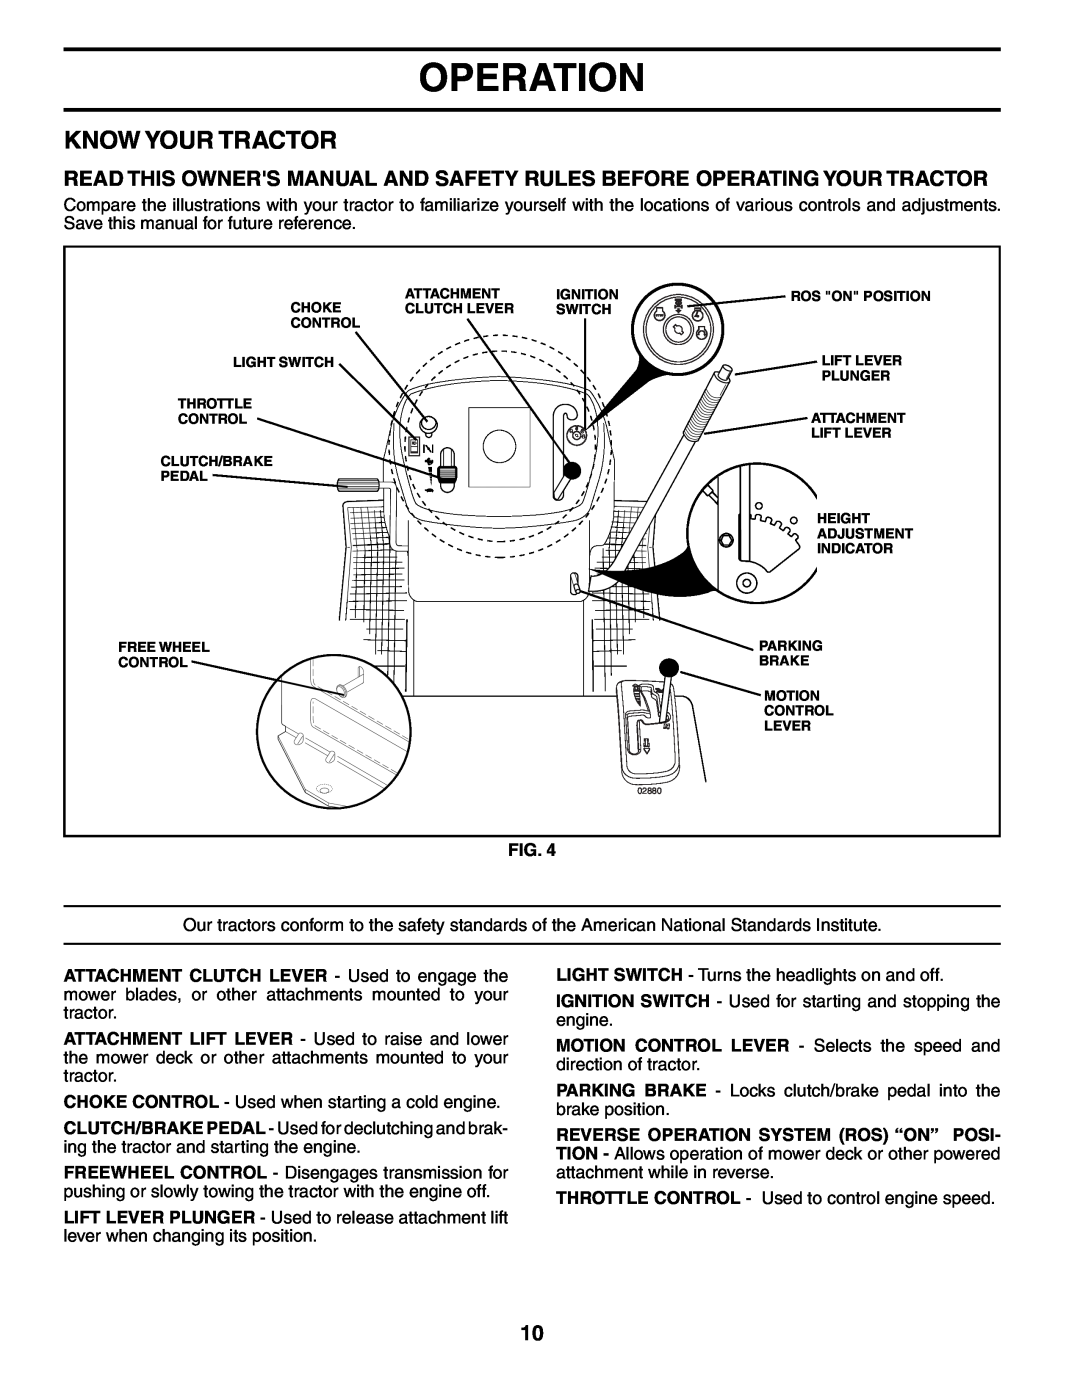 Poulan HD21H42 manual Know Your Tractor, Operation 